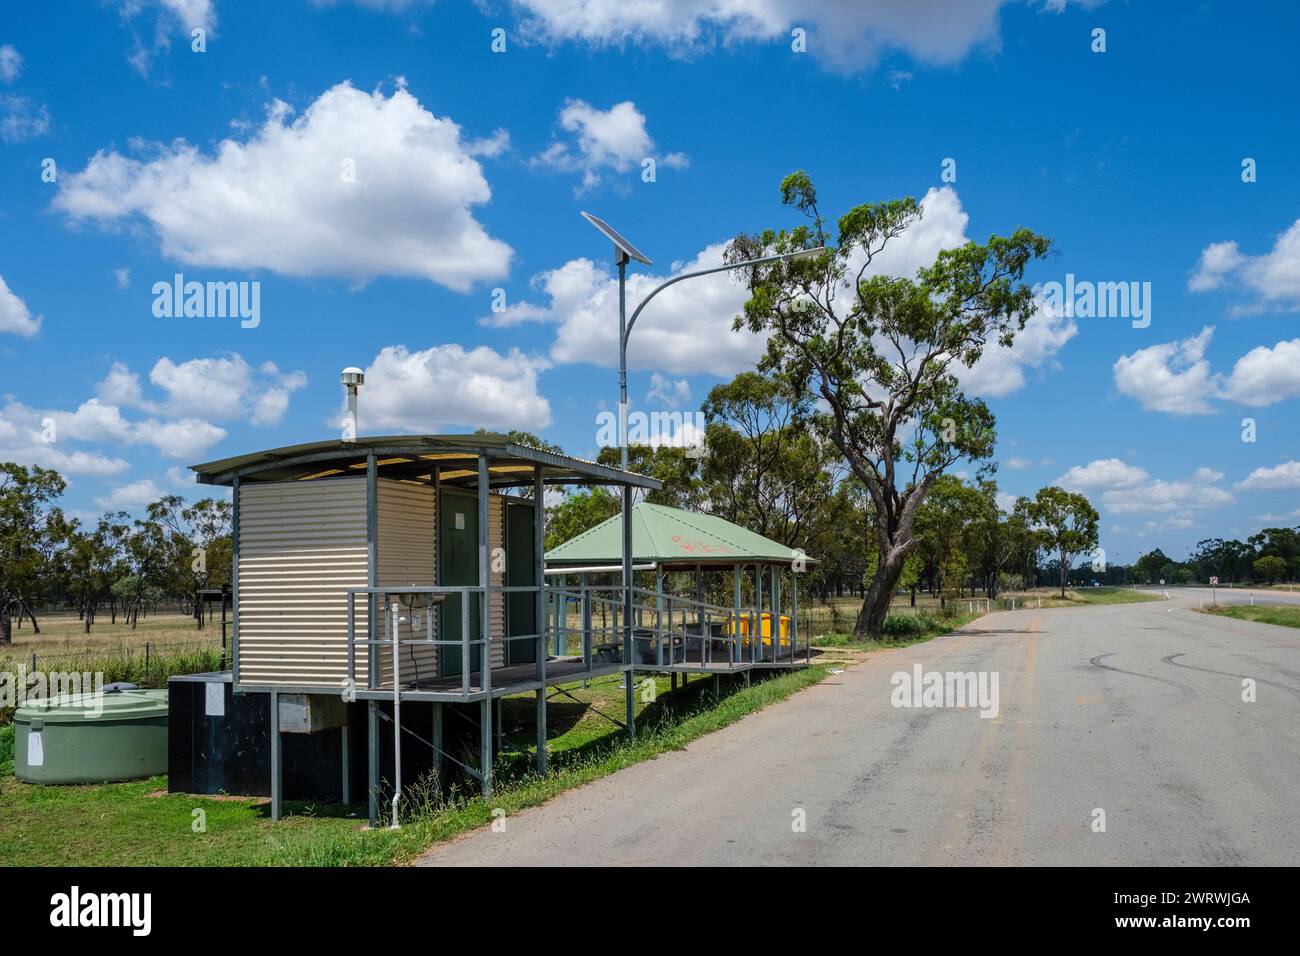 A drop toilet at a rest stop on the Flinders Highway at Mingela, Queensland, Australia Stock Photo